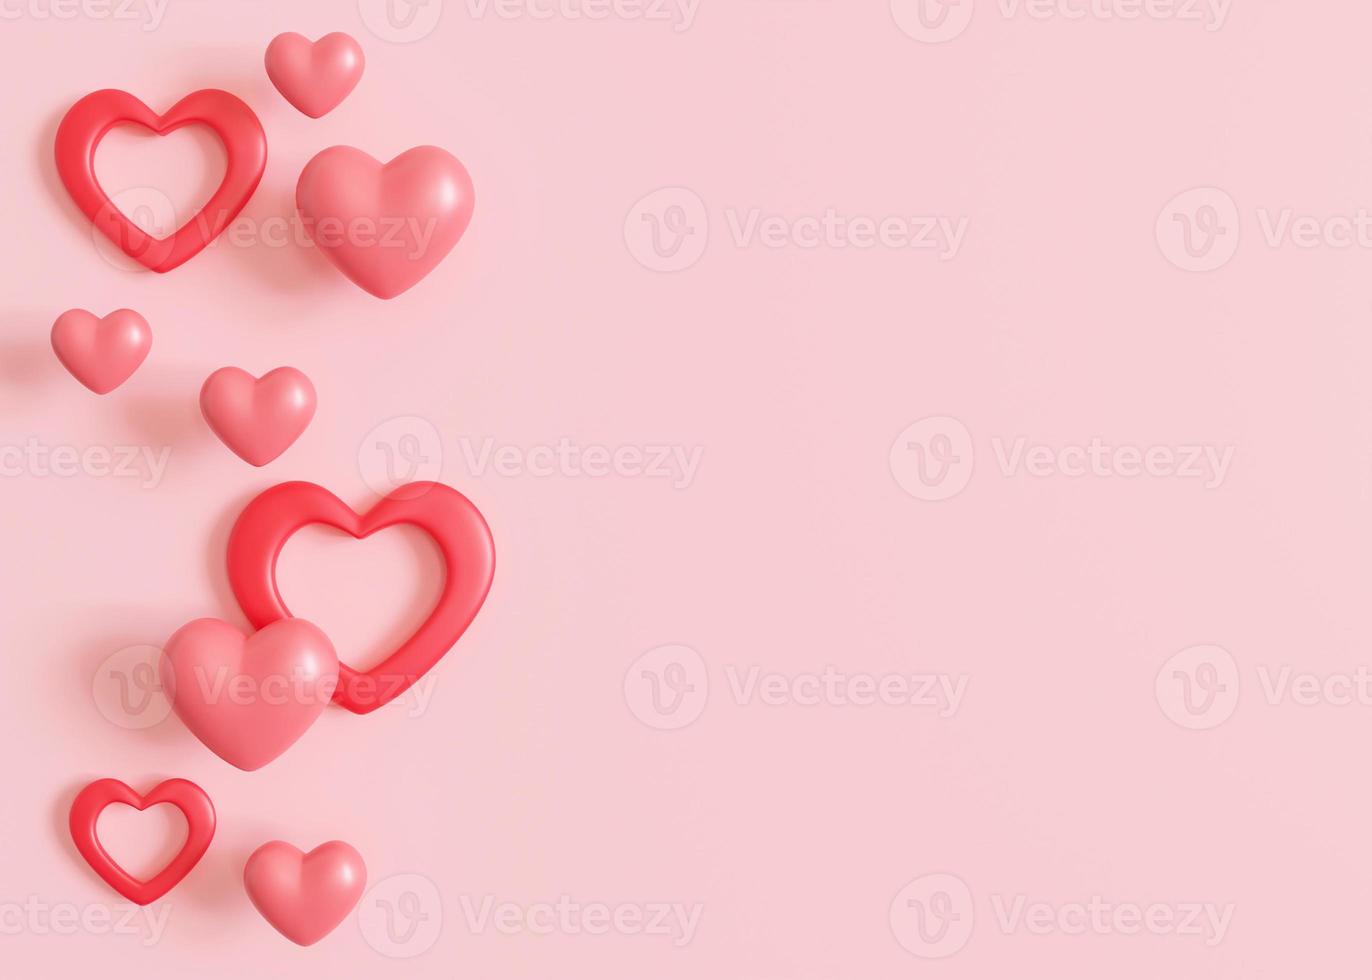 Pink background with hearts and copy space. Valentine's Day, Mother's Day, Wedding backdrop. Empty space for advertising text, invitation, logo. Postcard, greeting card design. Love symbol. 3D render. photo